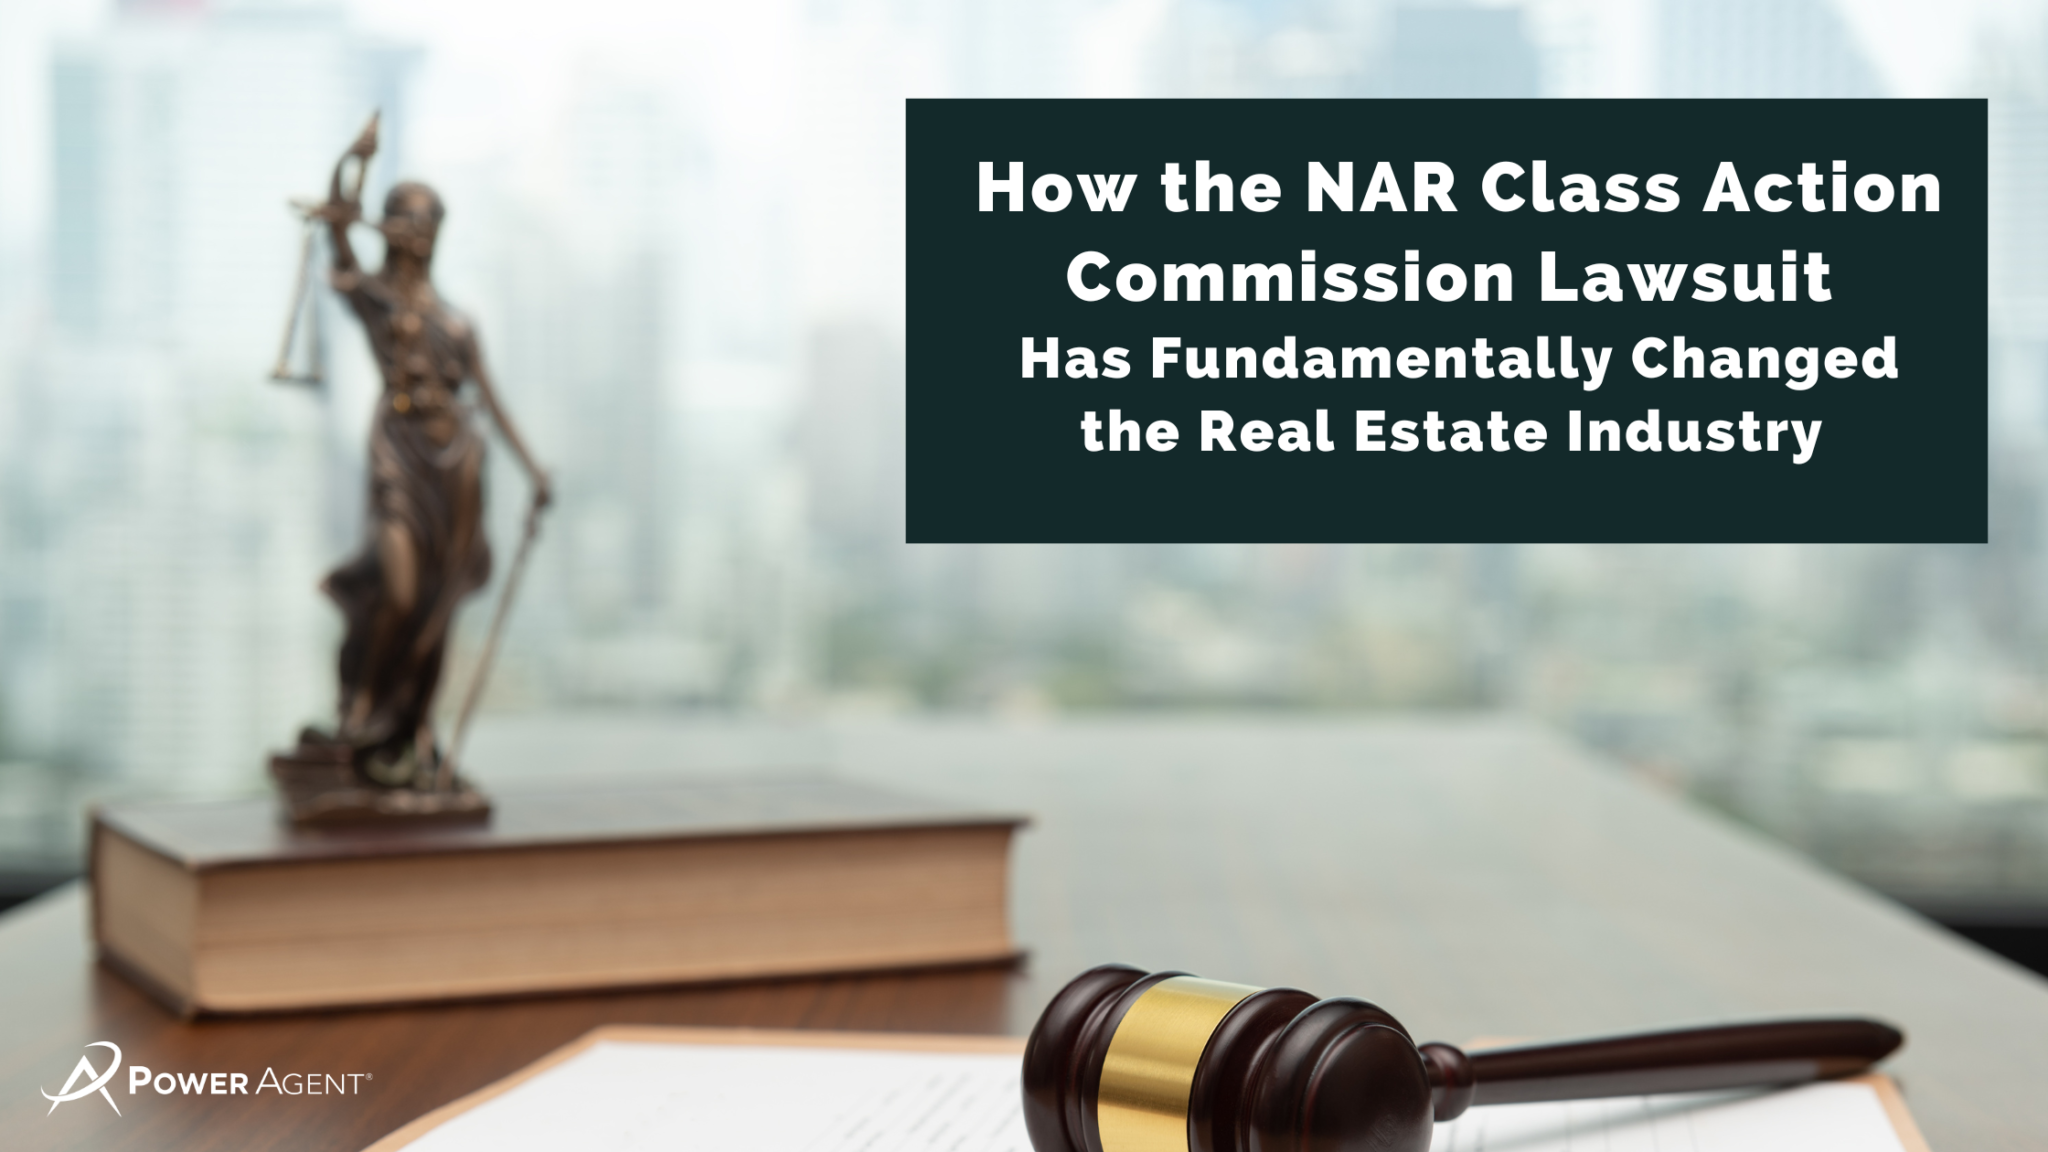 NAR Class Action Commission Lawsuit Changed Real Estate